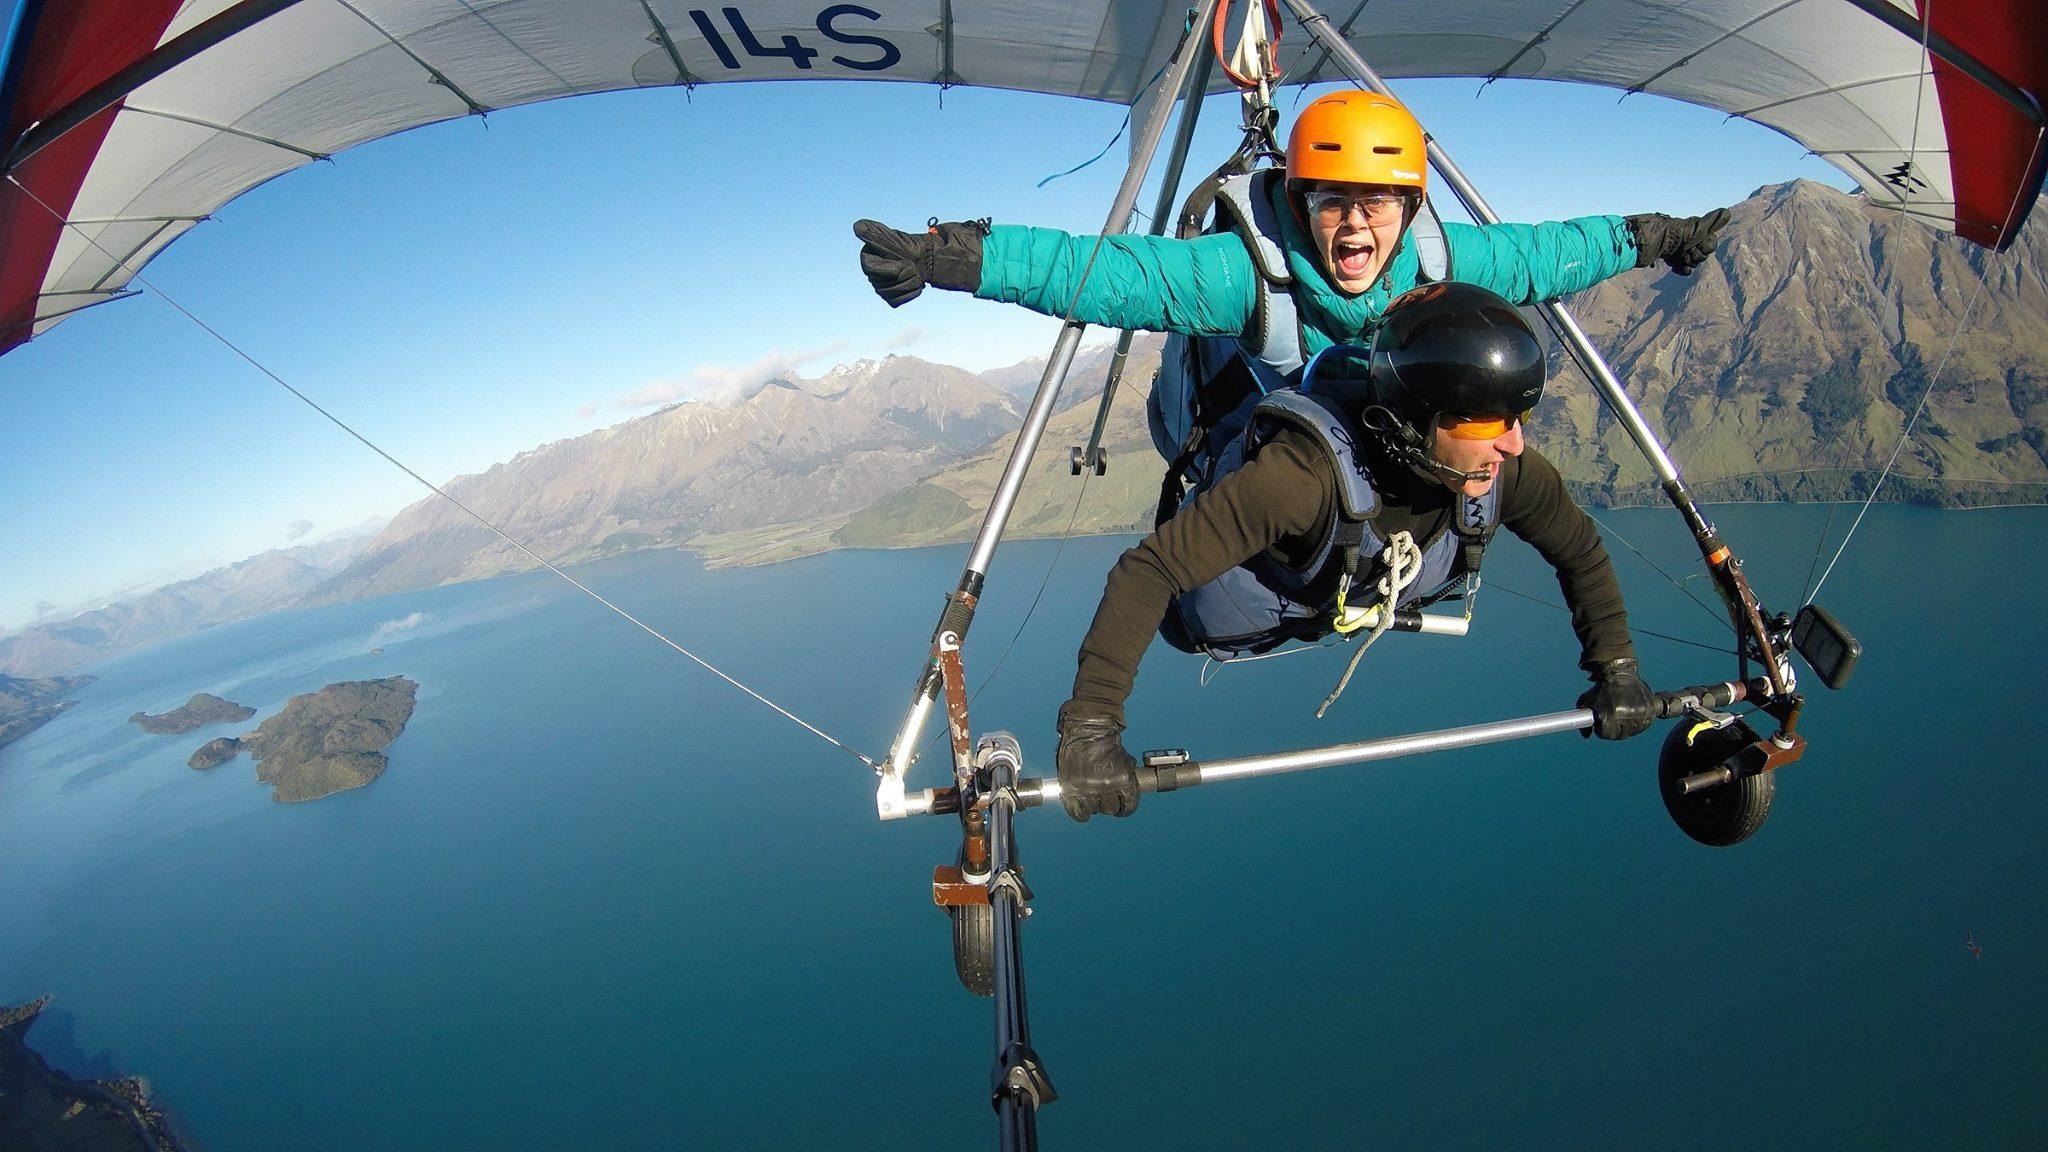 Hang Gliding: Aerotow, Skytrek Queenstown, Soaring in tandem 2,000 feet above the earth. 2050x1160 HD Wallpaper.